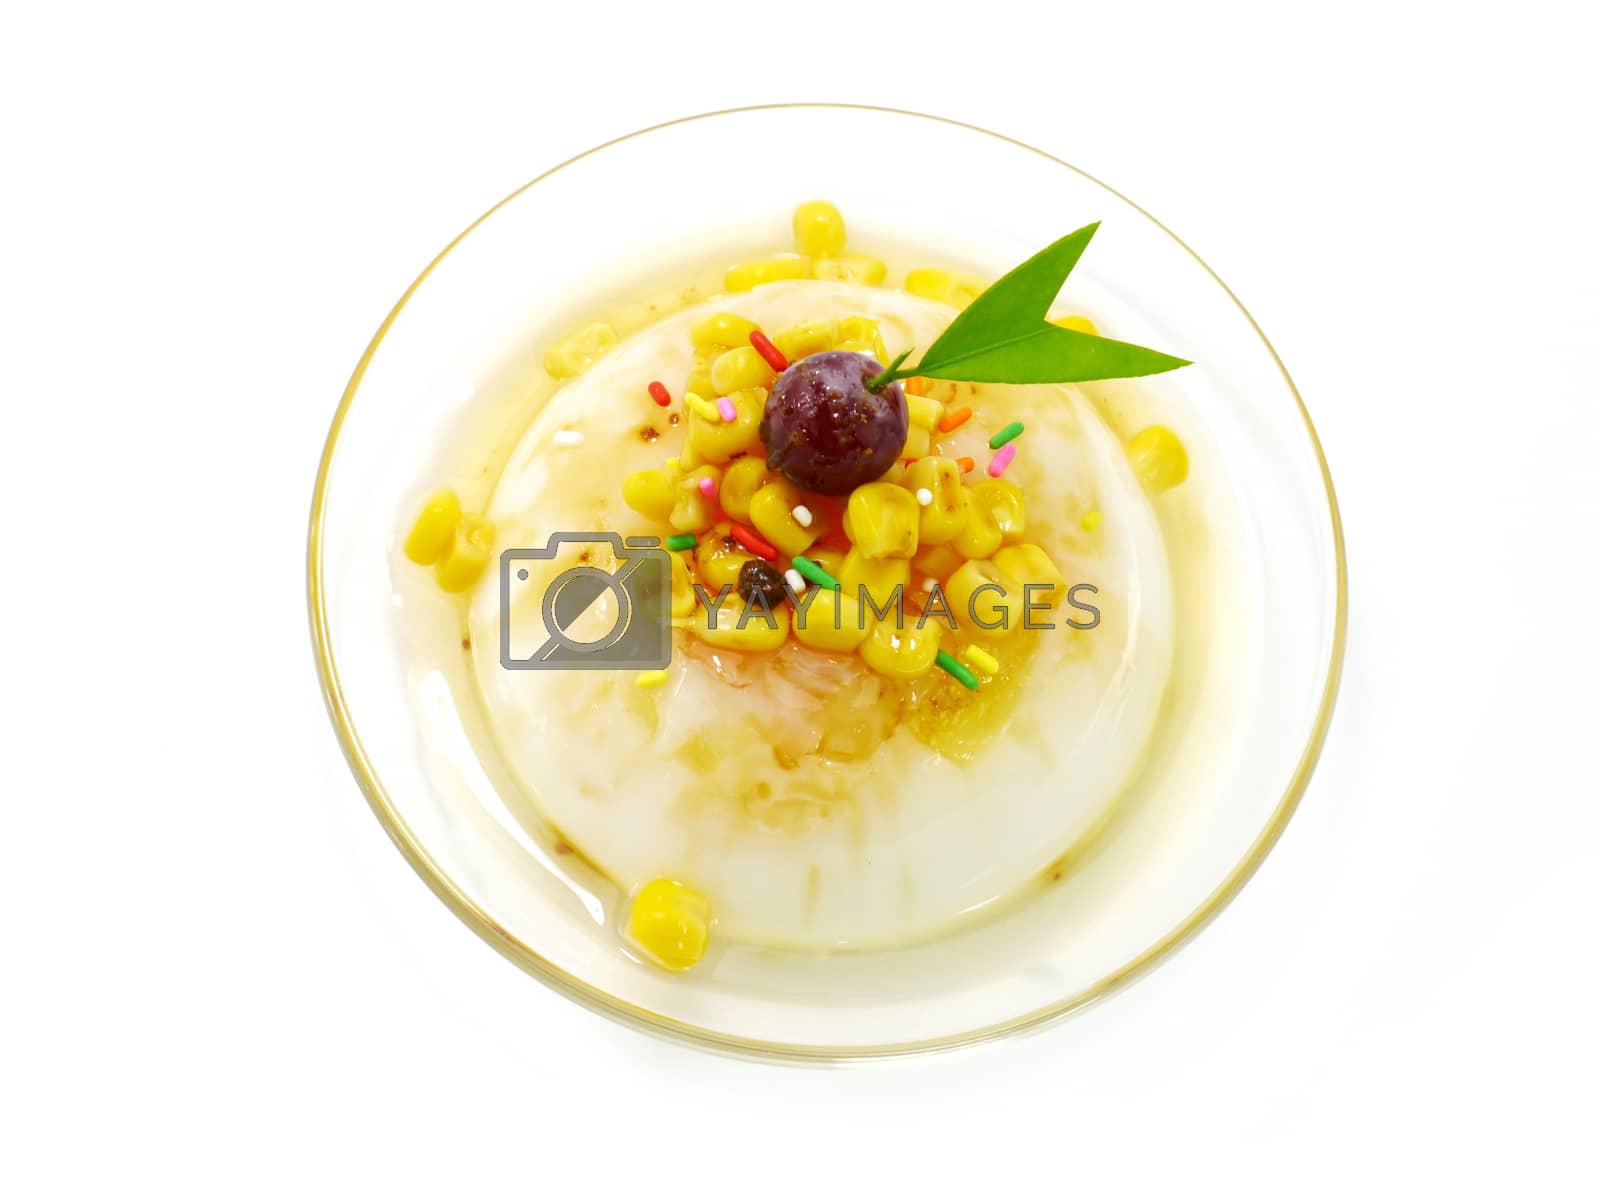 Royalty free image of Agar dessert with fresh corn. by Noppharat_th